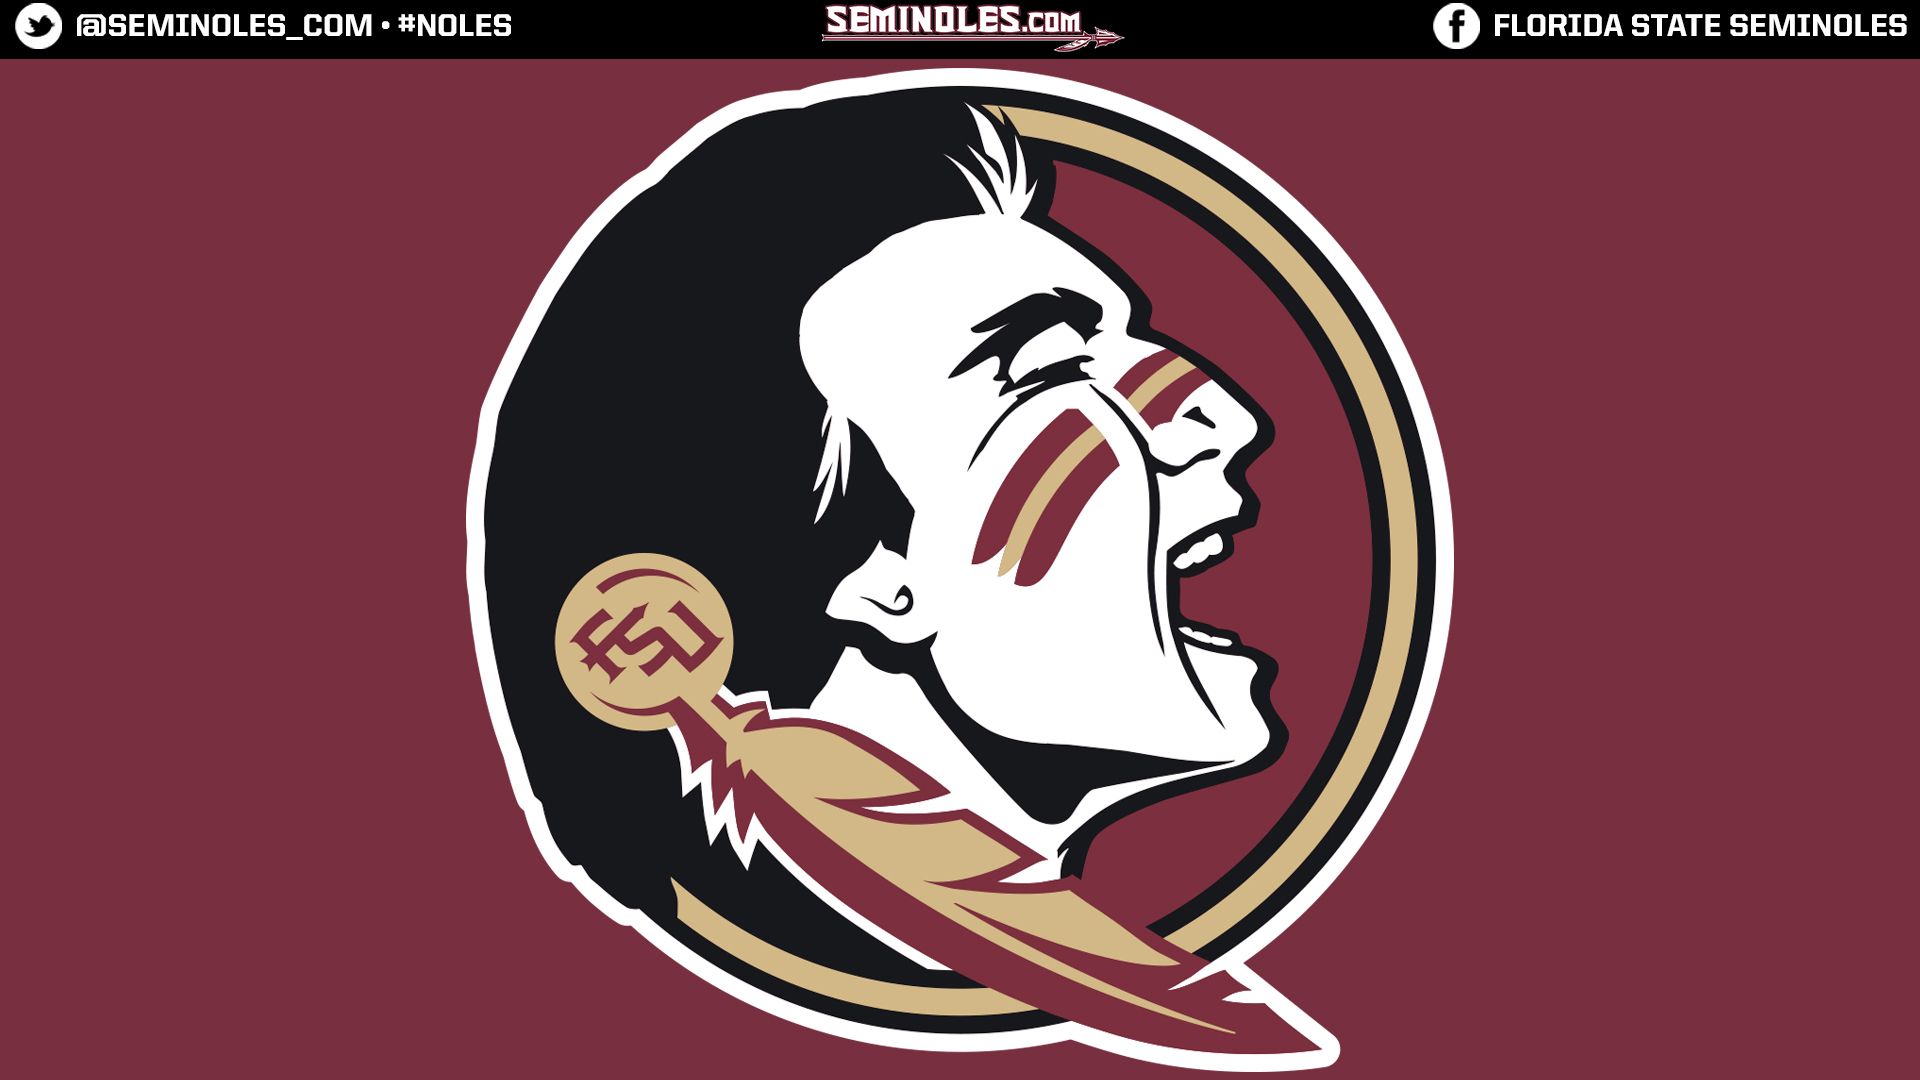 Florida State Seminoles Wallpapers Browser Themes